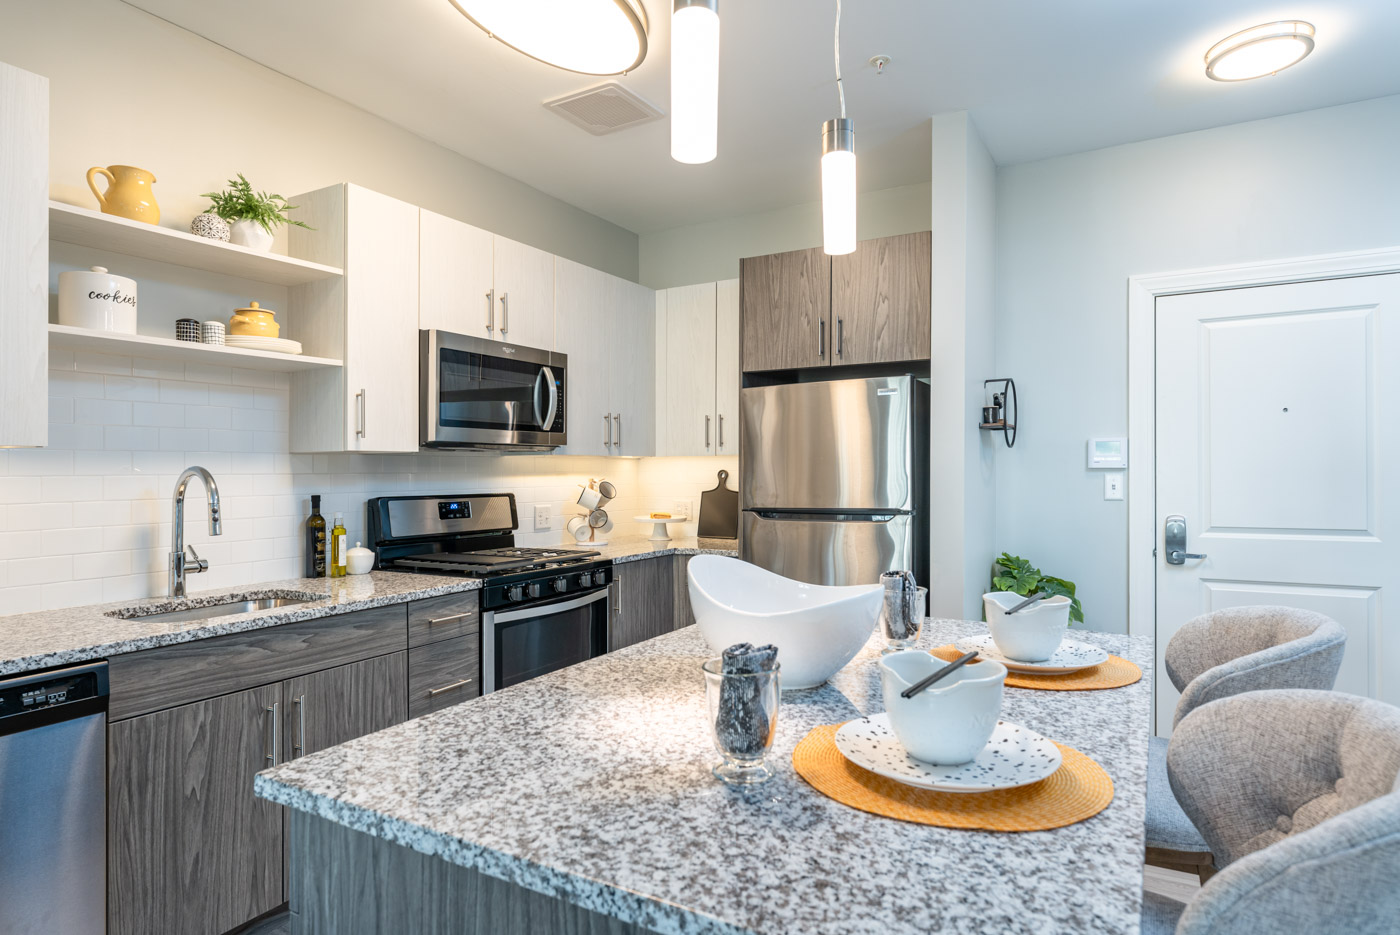 One bedroom model apartment kitchen with stainless appliances, marble counters, white cabinets, stove, microwave and oven with undercabinet lighting. Kitchen island with place settings and overhead lights